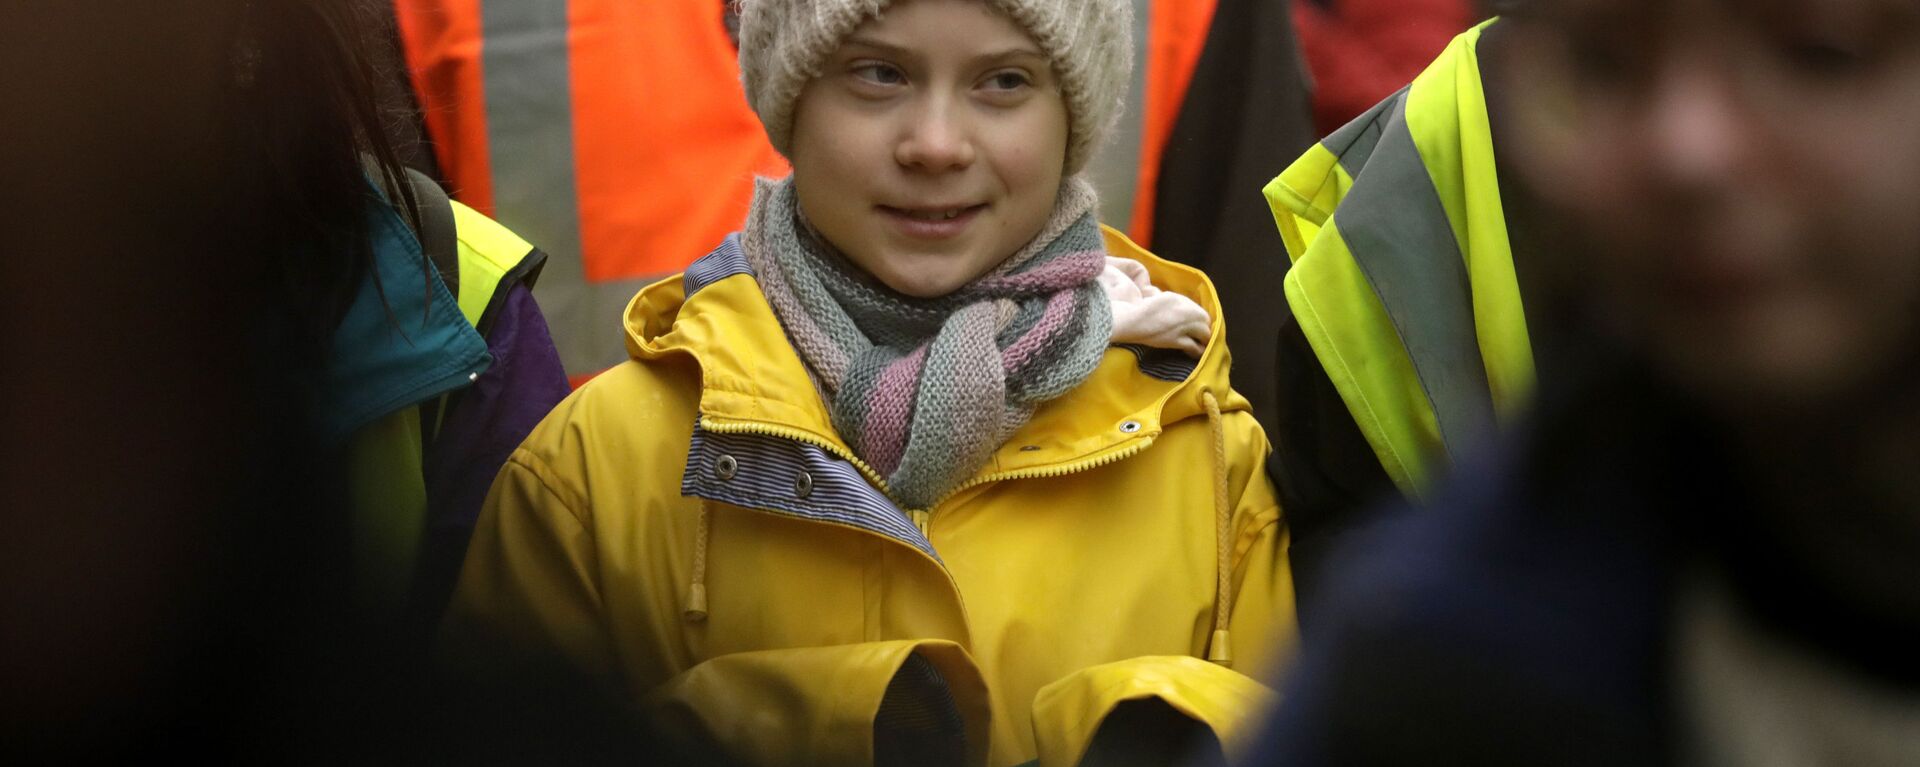 Climate activist Greta Thunberg, from Sweden marches with other demonstrators as she participates in a school strike climate protest in Bristol, south west England, Friday, Feb. 28, 2020. - Sputnik International, 1920, 24.04.2021